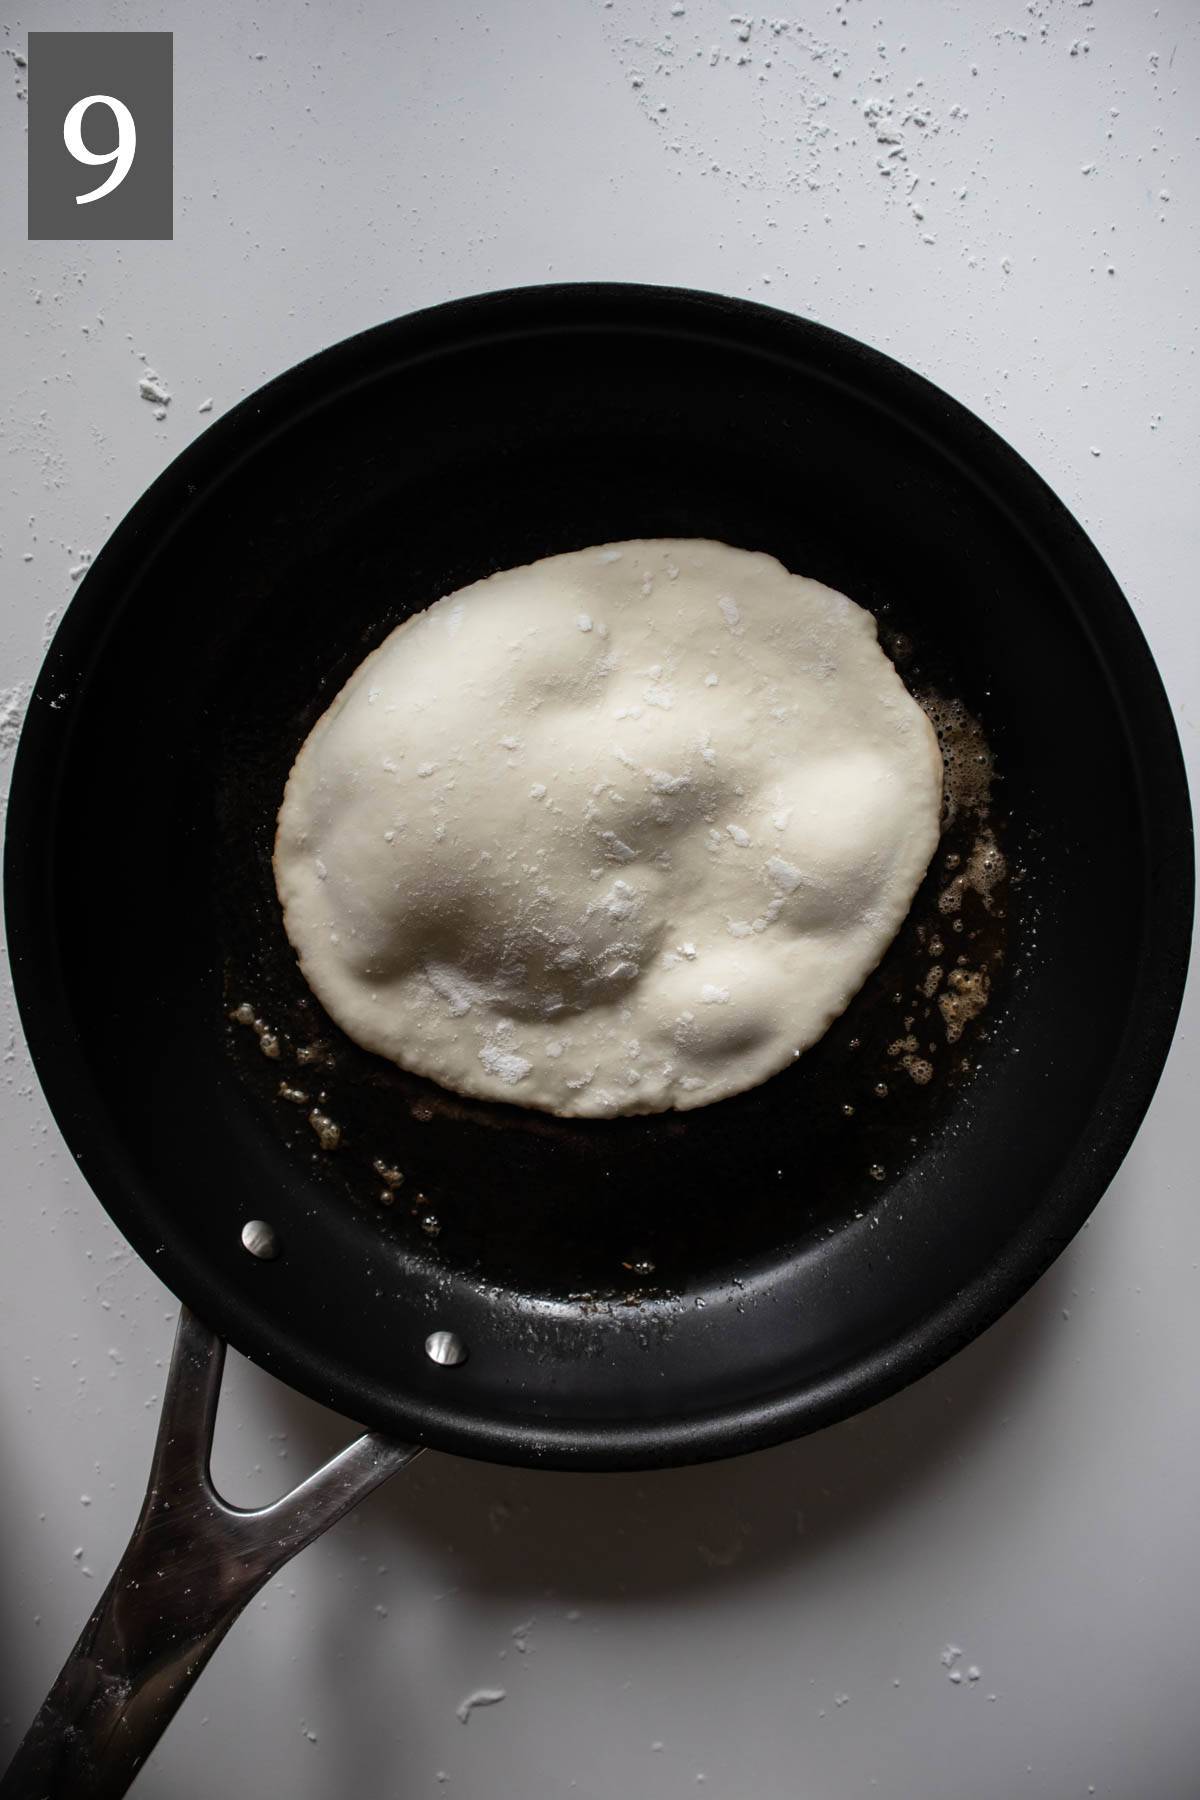 Frying naan dough in a cast iron skillet.